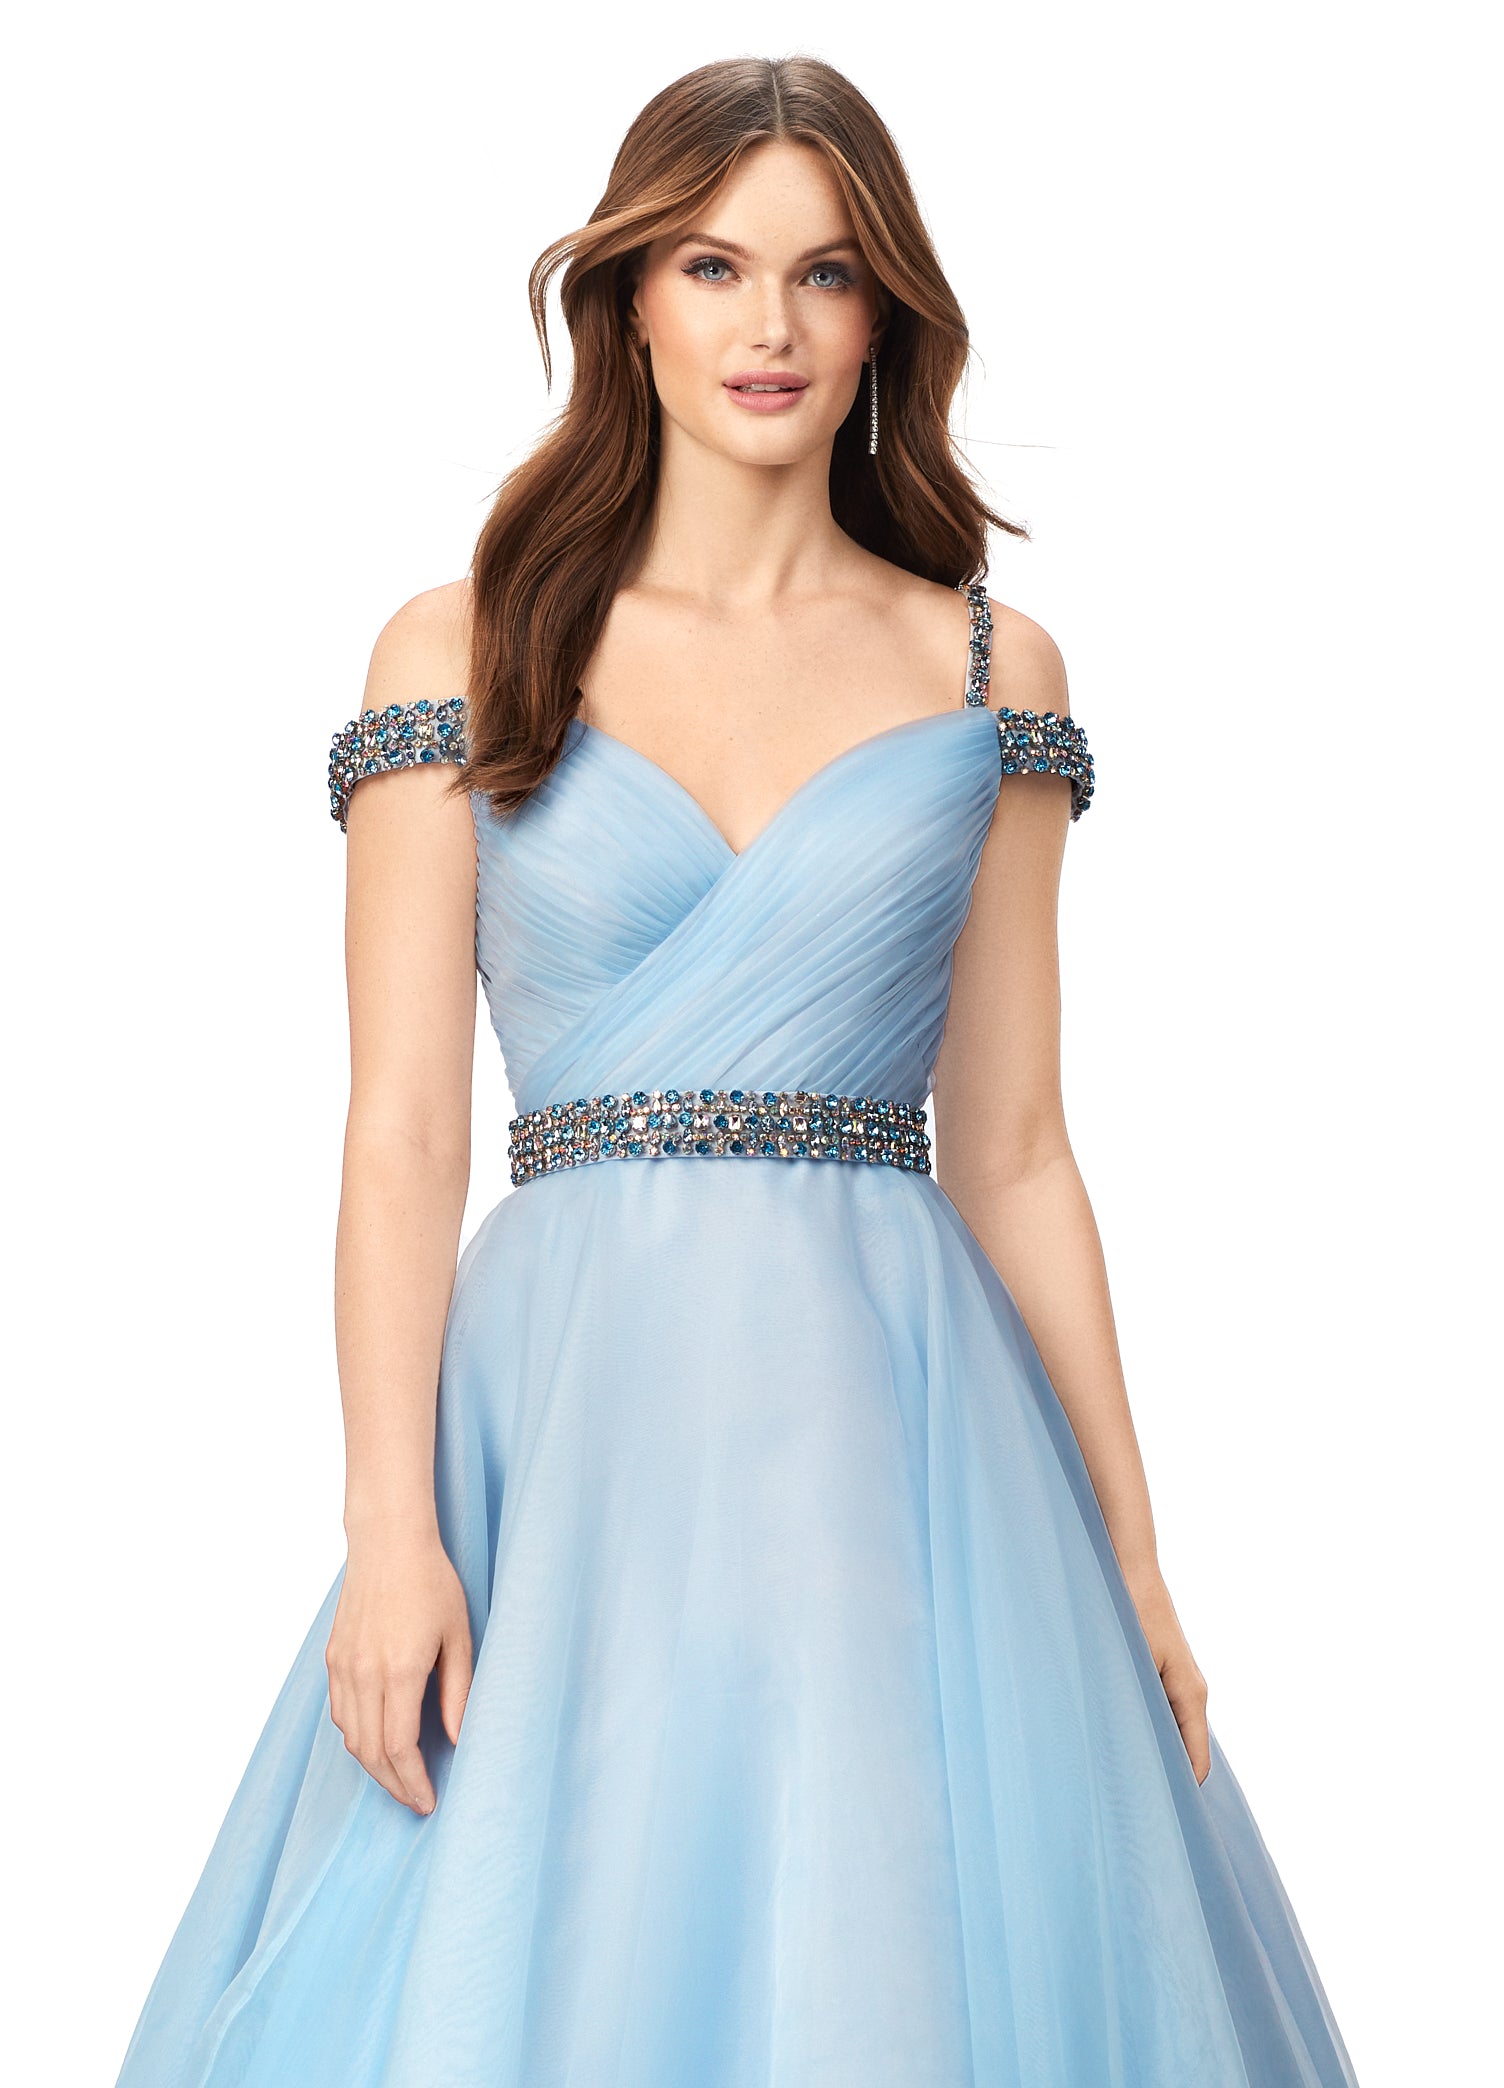 Ashley Lauren 11221 Dazzle in this off shoulder organza ball gown. The wrap bustier is complete with ruching and the spaghetti straps, off shoulder straps and belt are encrusted with rhinestones.